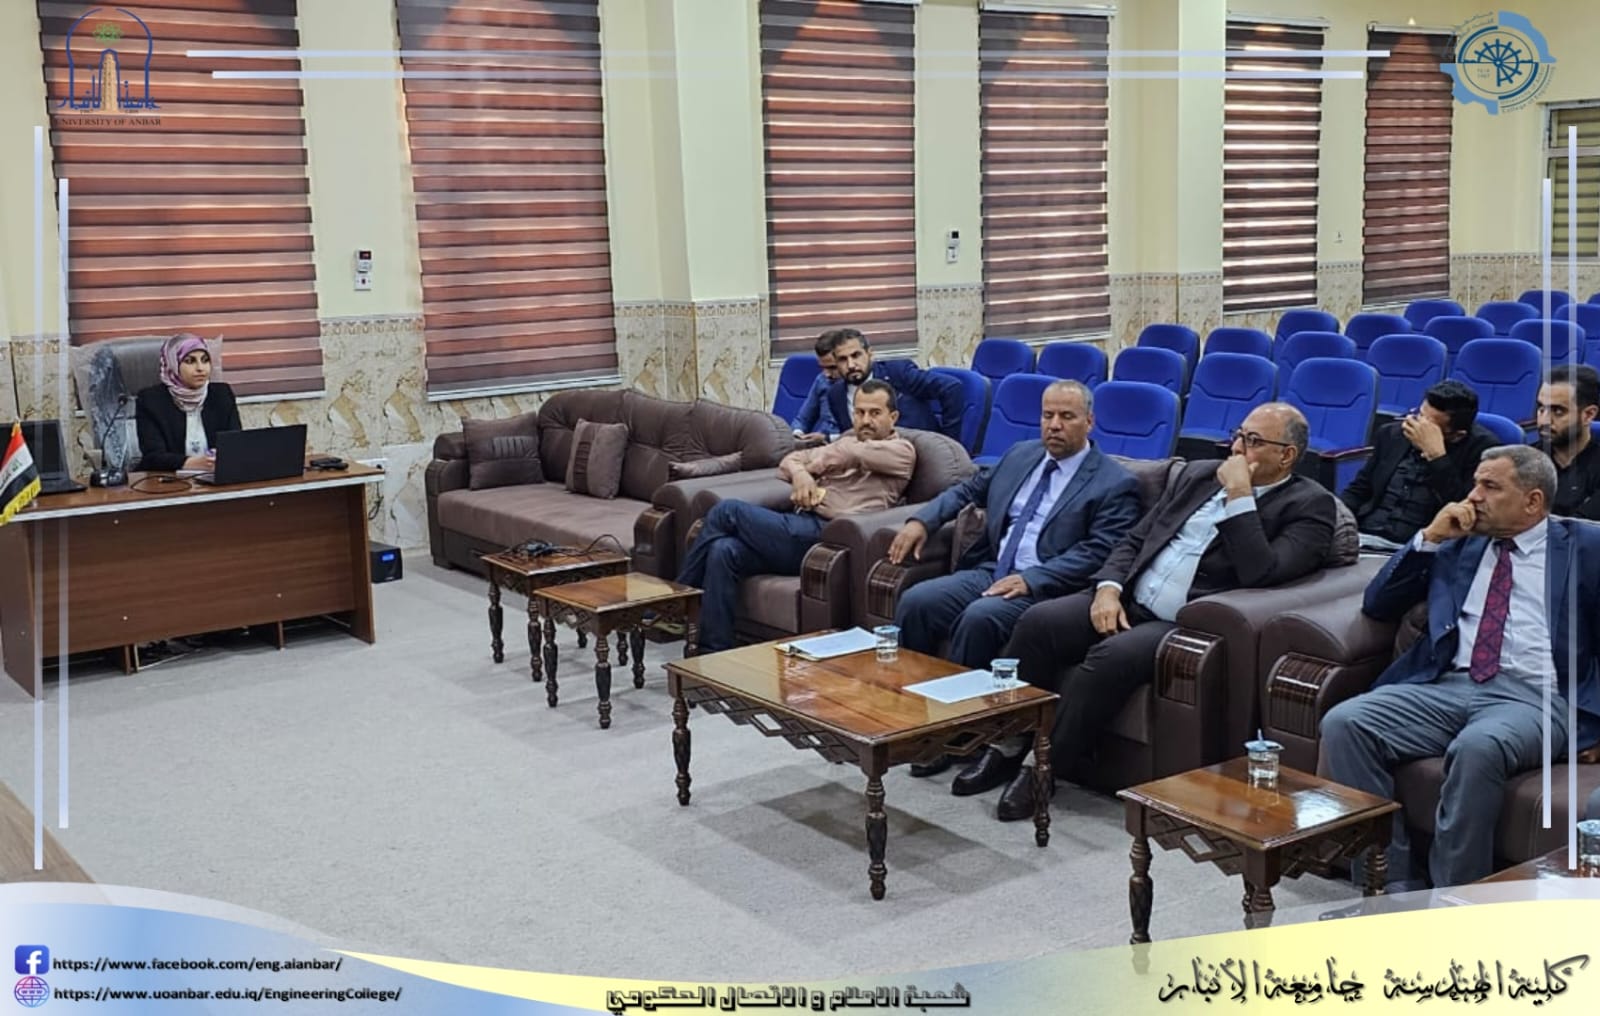 eminar was organized by the Department of Dams and Water Resources, Faculty of Engineering